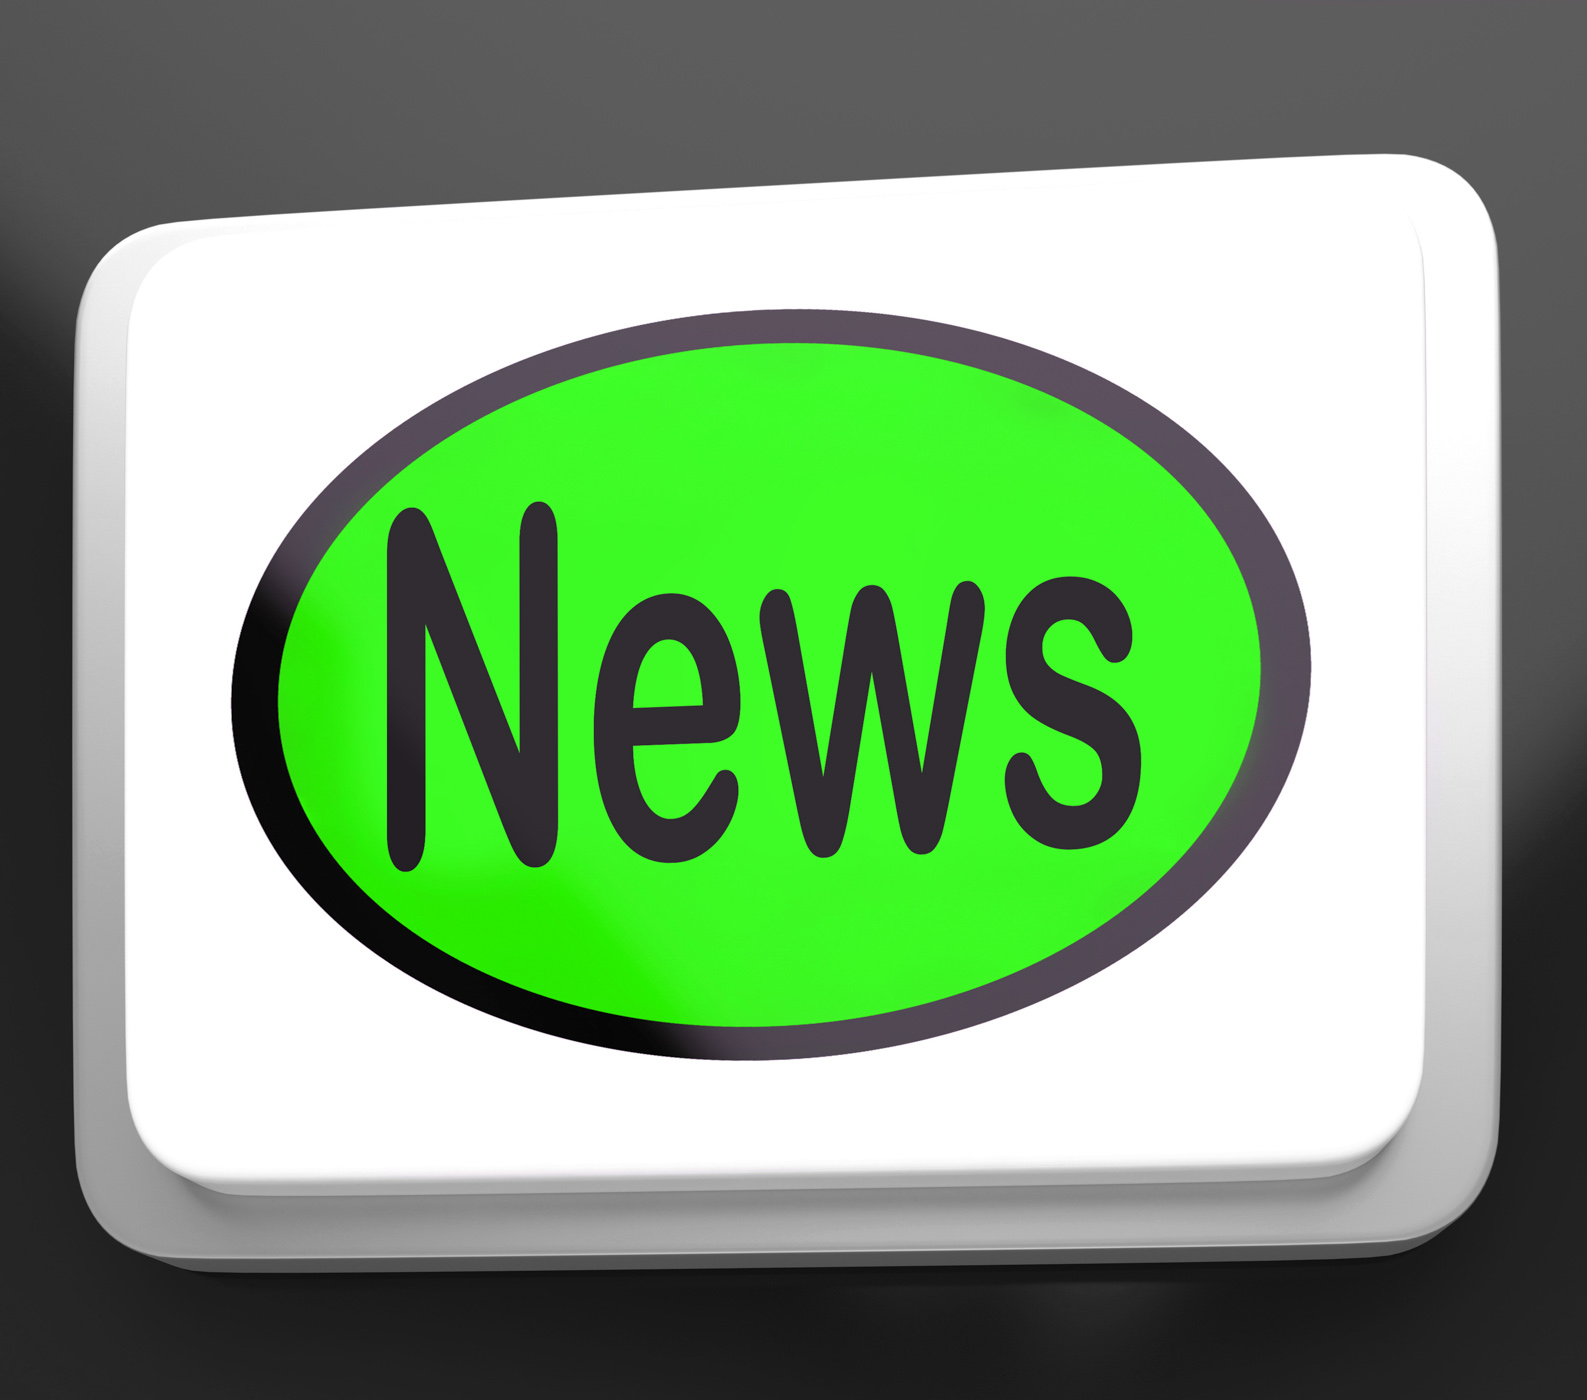 News button shows newsletter broadcast online photo